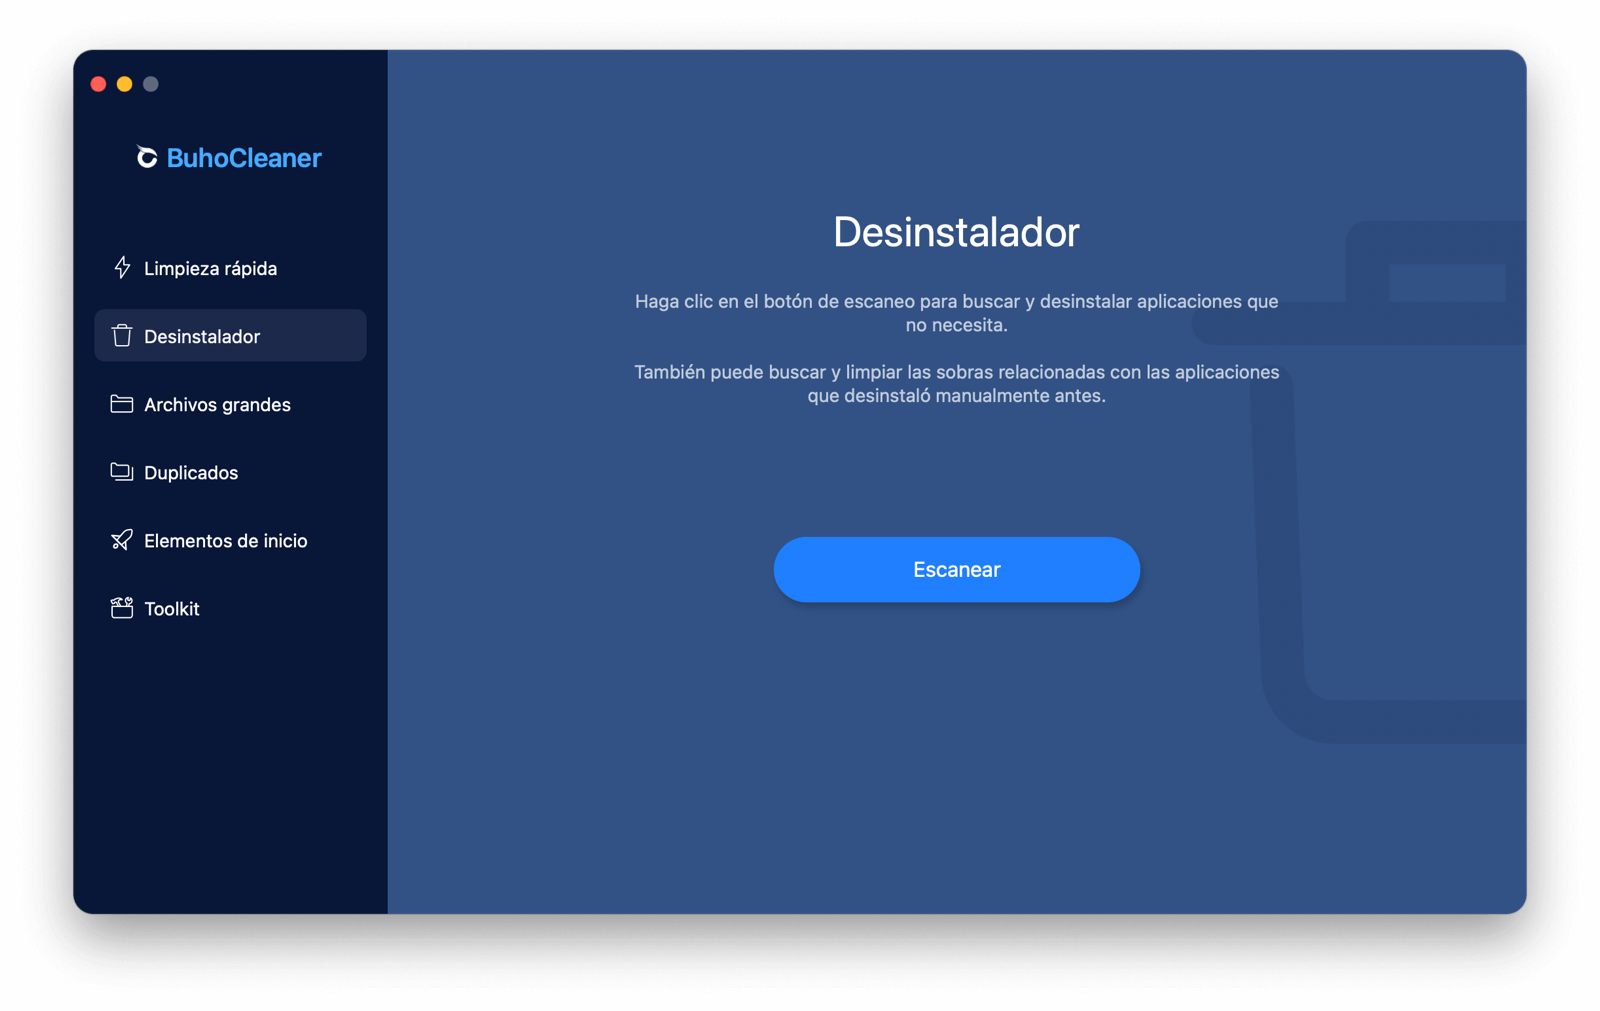 uninstall-app-with-buhocleaner_es.png